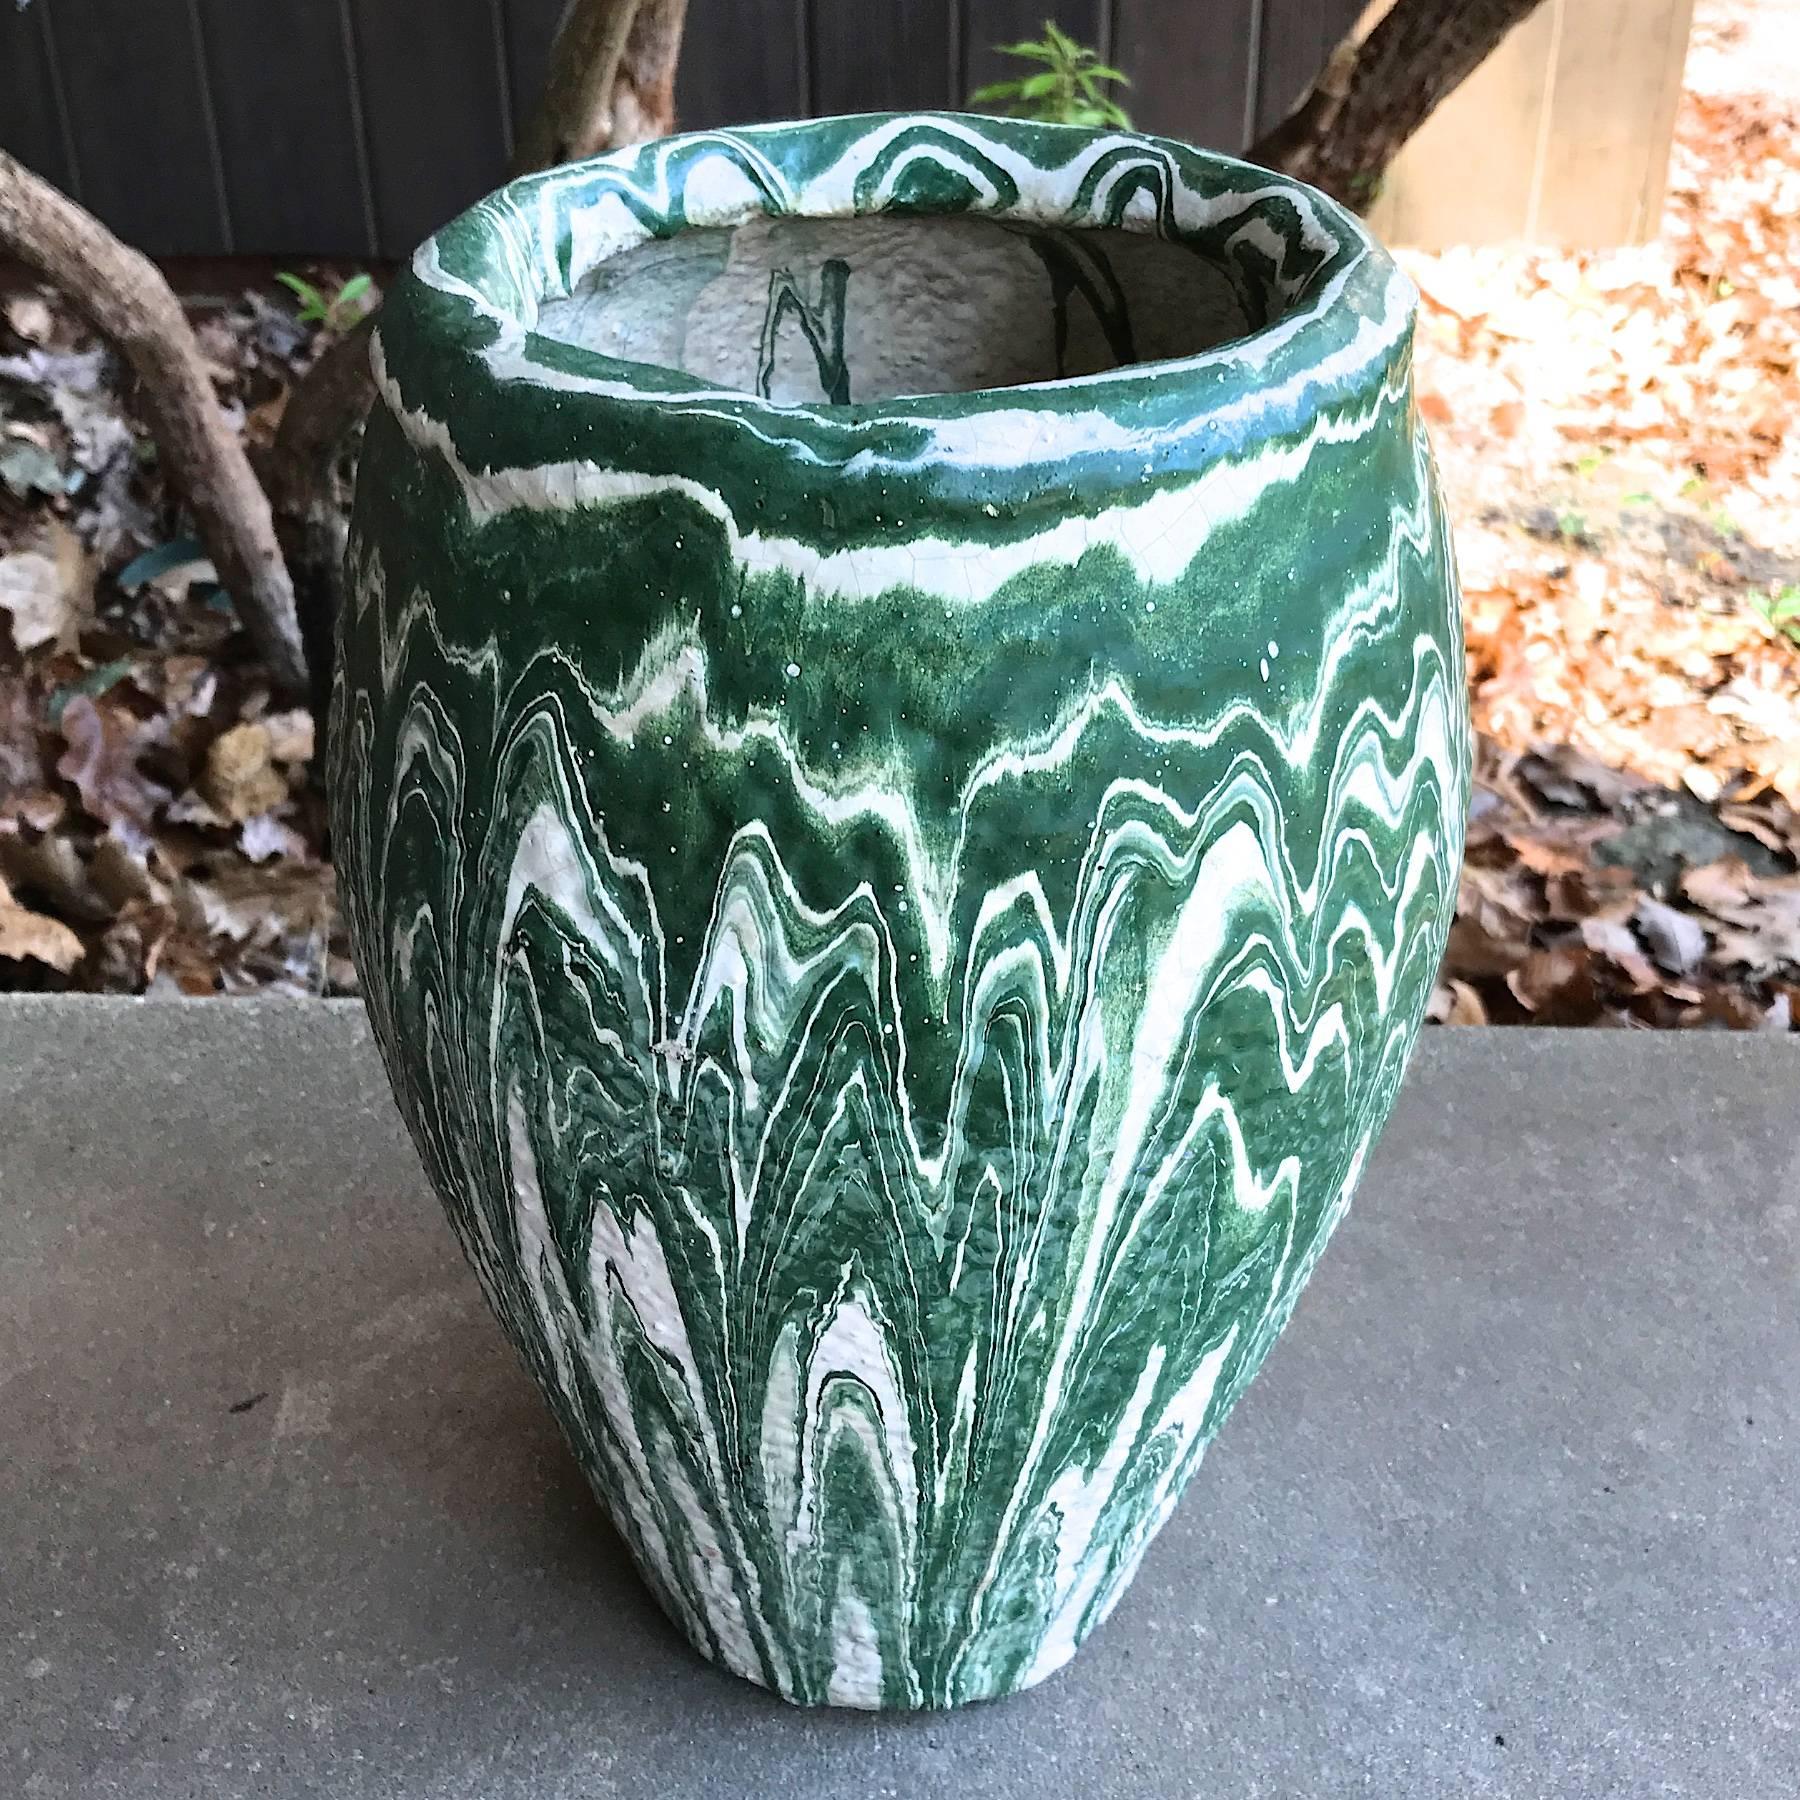 13.5 Inch tall Niloak Pottery Co. Vase in Green and White Swirls. The Niloak Company was founded by Charles Dean Hyten and located in Benton, Ark., from 1909 to 1947. They began making crocks, jugs and churns. When demand for utilitarian ware waned,